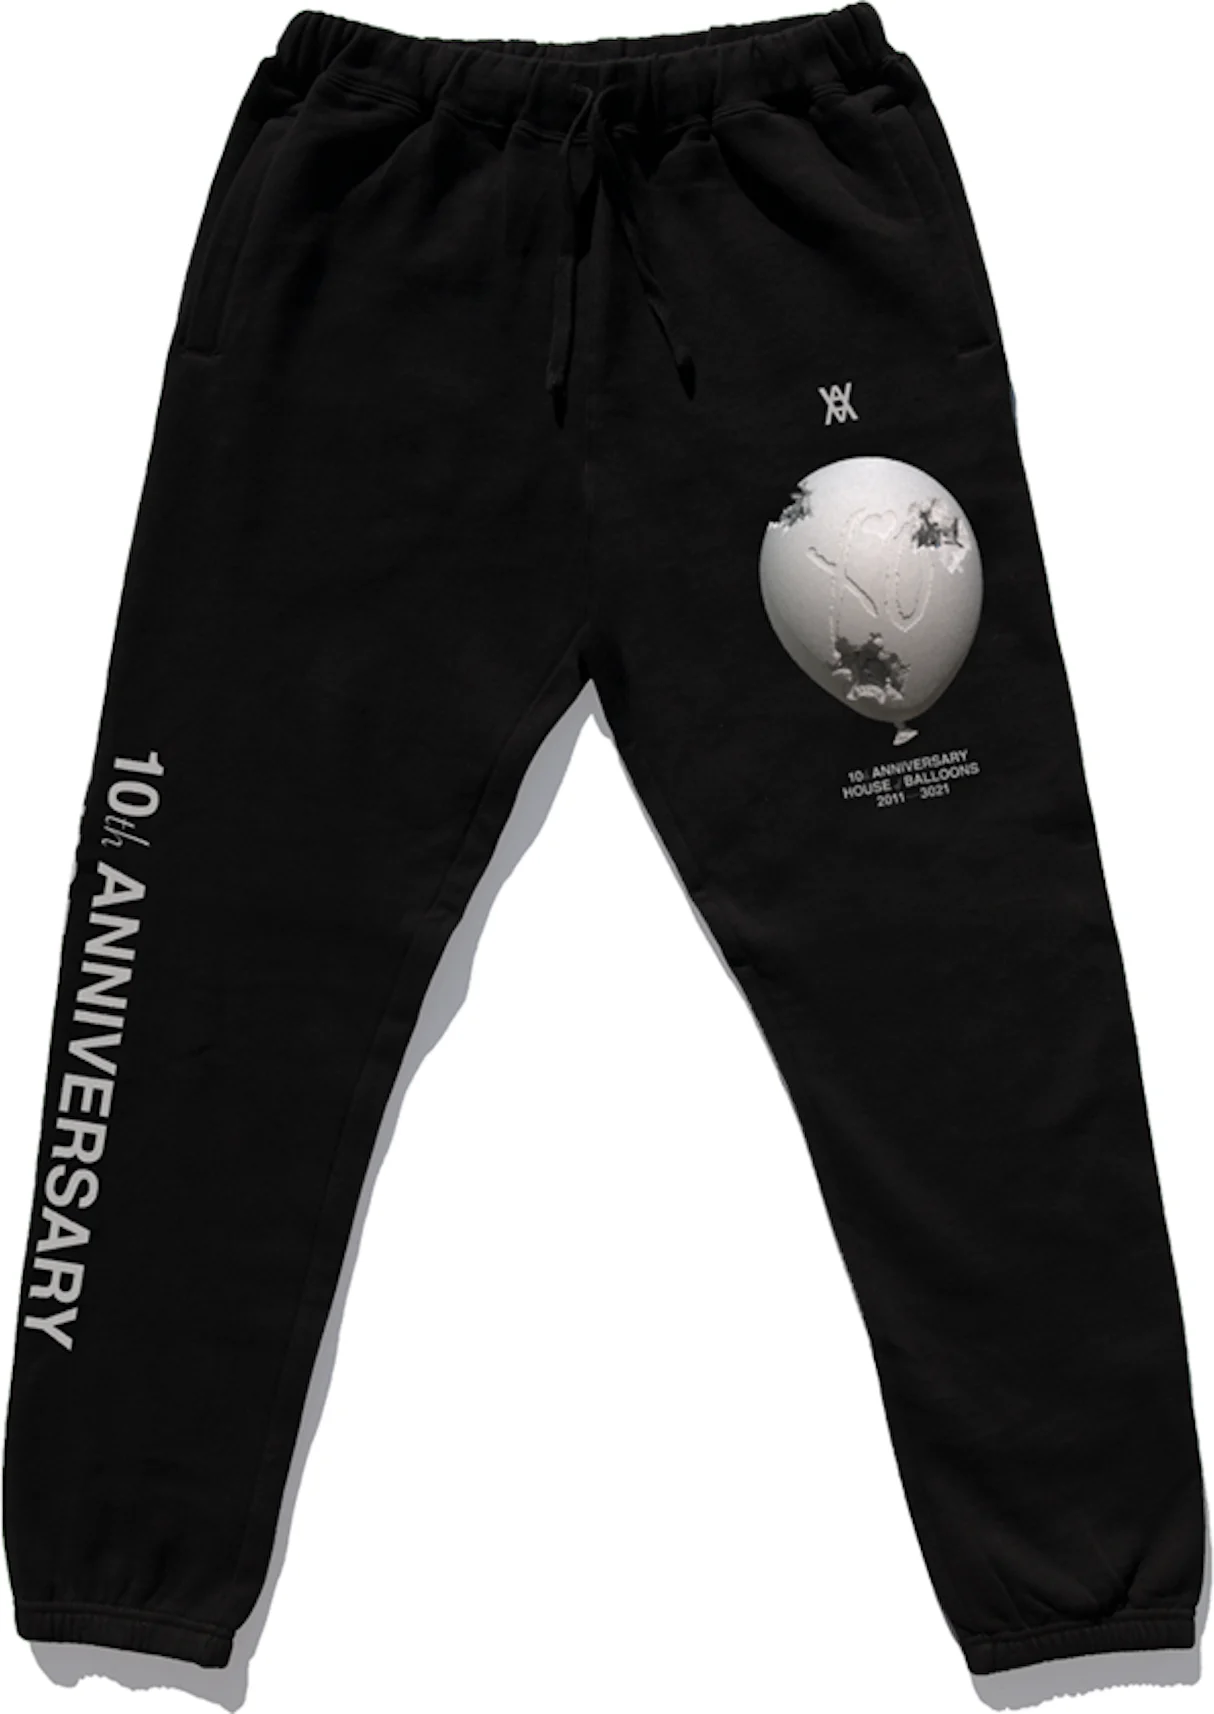 https://images.stockx.com/images/The-Weeknd-x-Daniel-Arsham-House-Of-Balloons-Eroded-Balloon-Sweatpants-Black.png?fit=fill&bg=FFFFFF&w=1200&h=857&fm=webp&auto=compress&dpr=2&trim=color&updated_at=1621189455&q=60